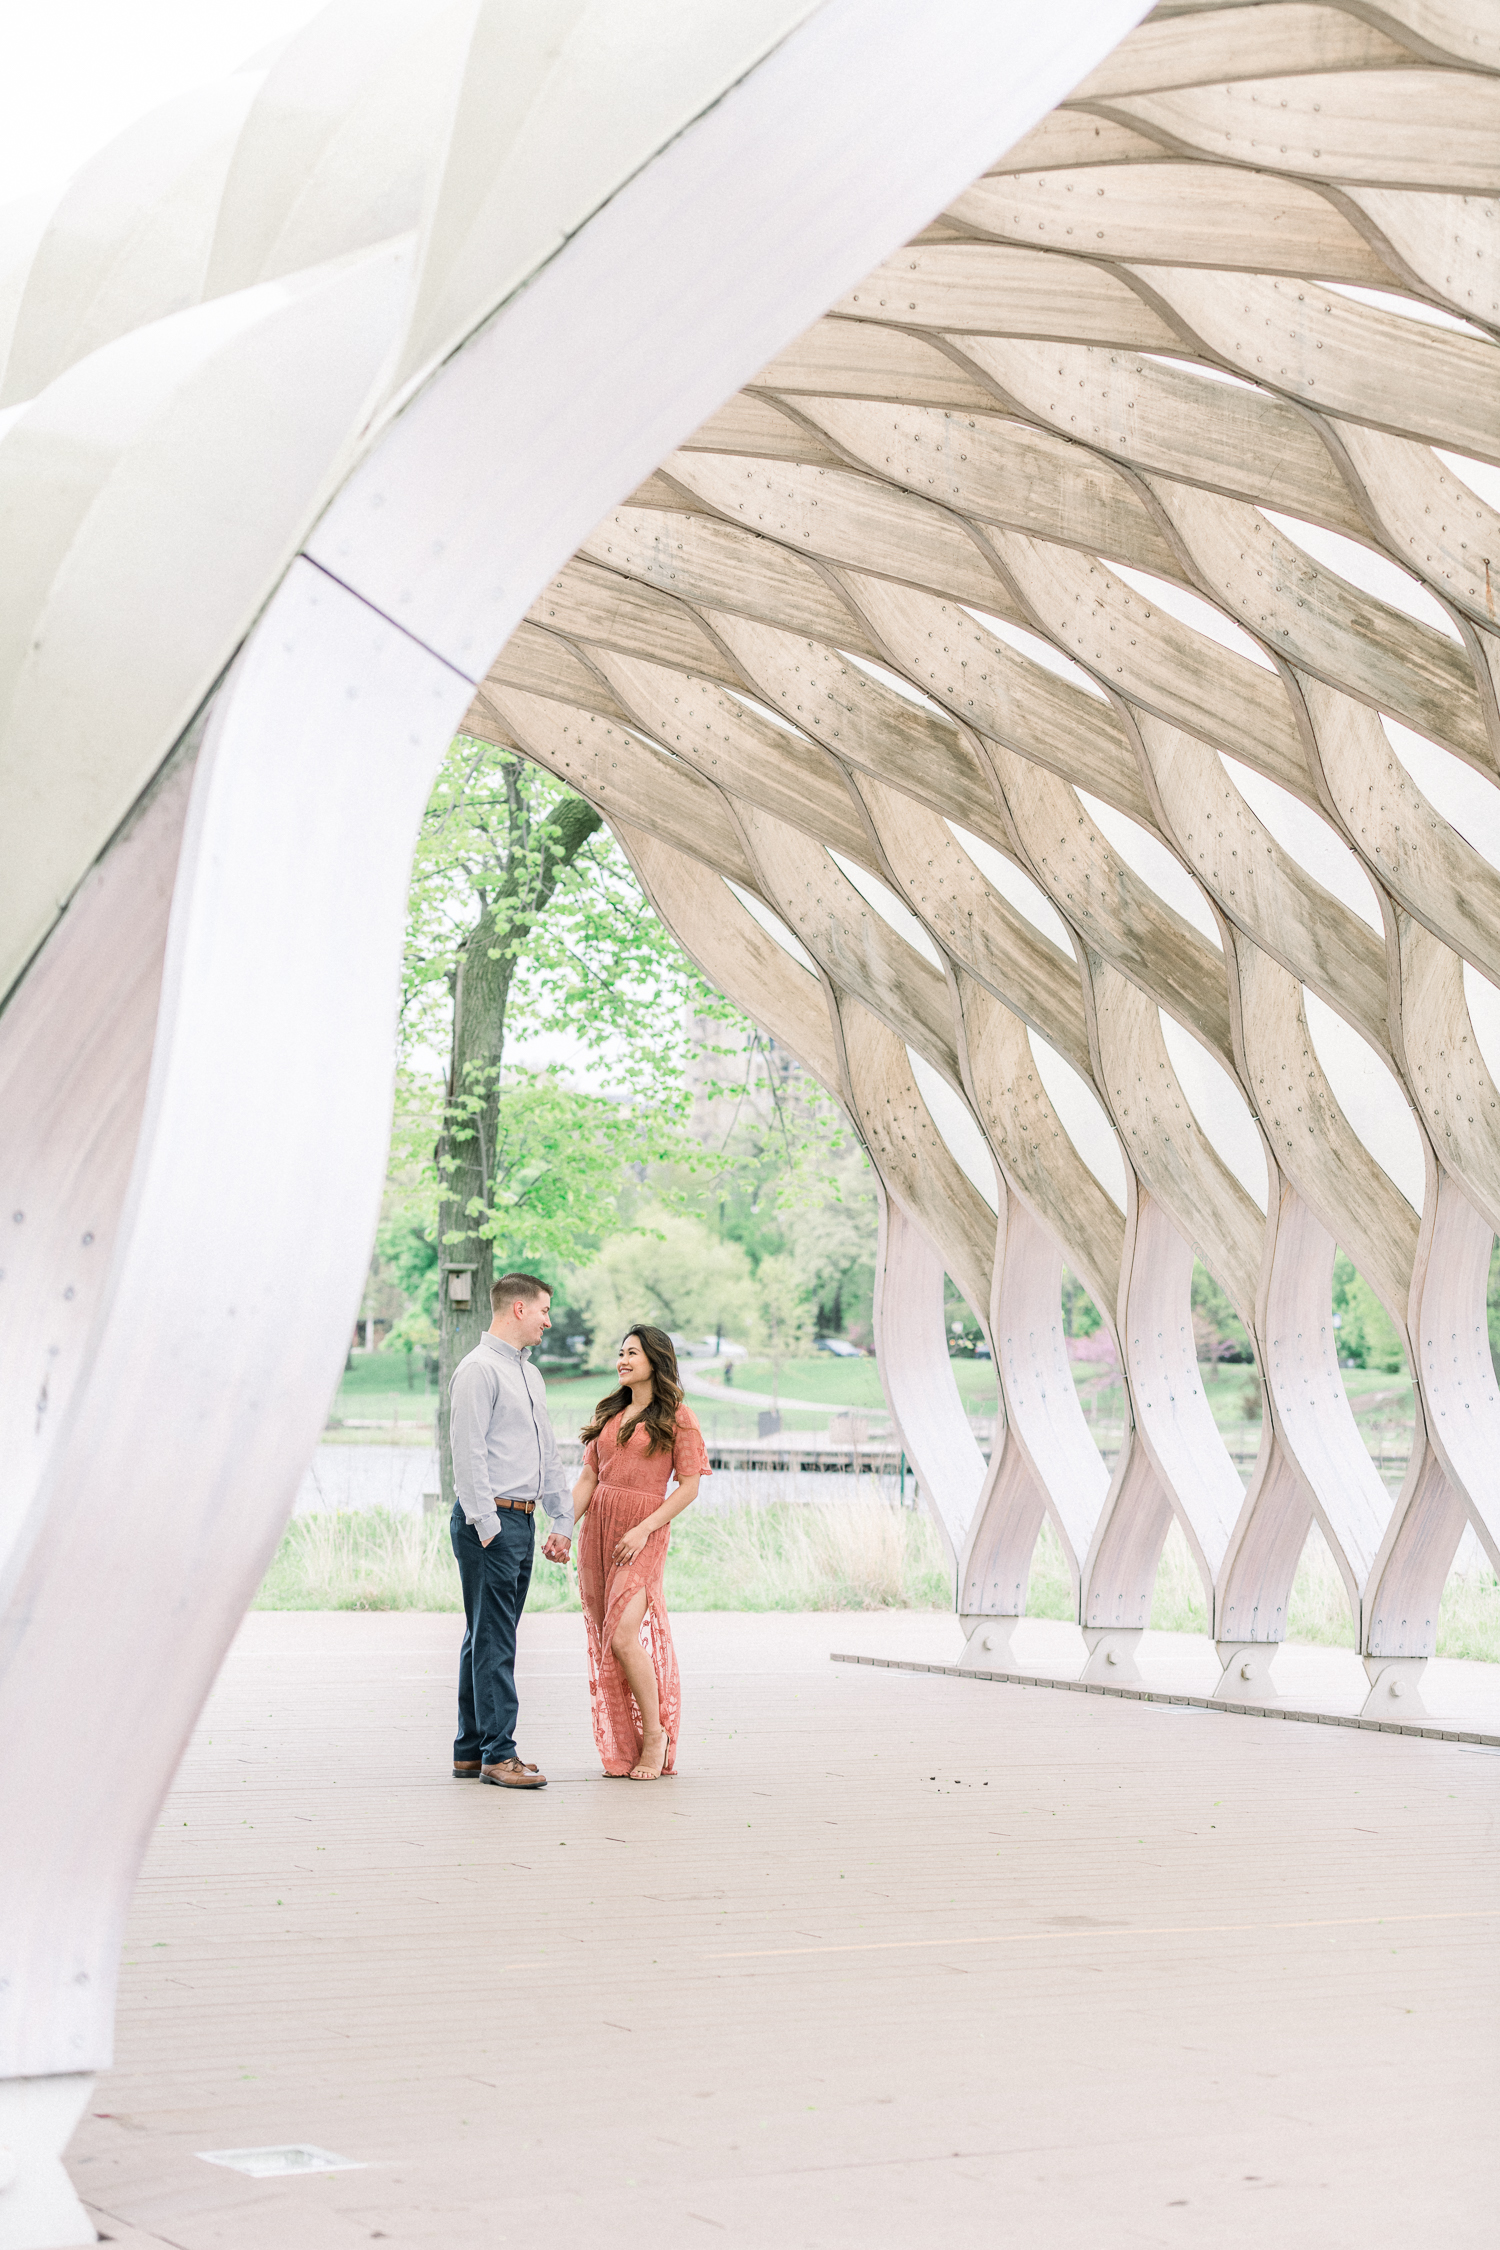 Engaged couple in the middle of the in the middle of the honeycomb at Lincoln Park Chicago